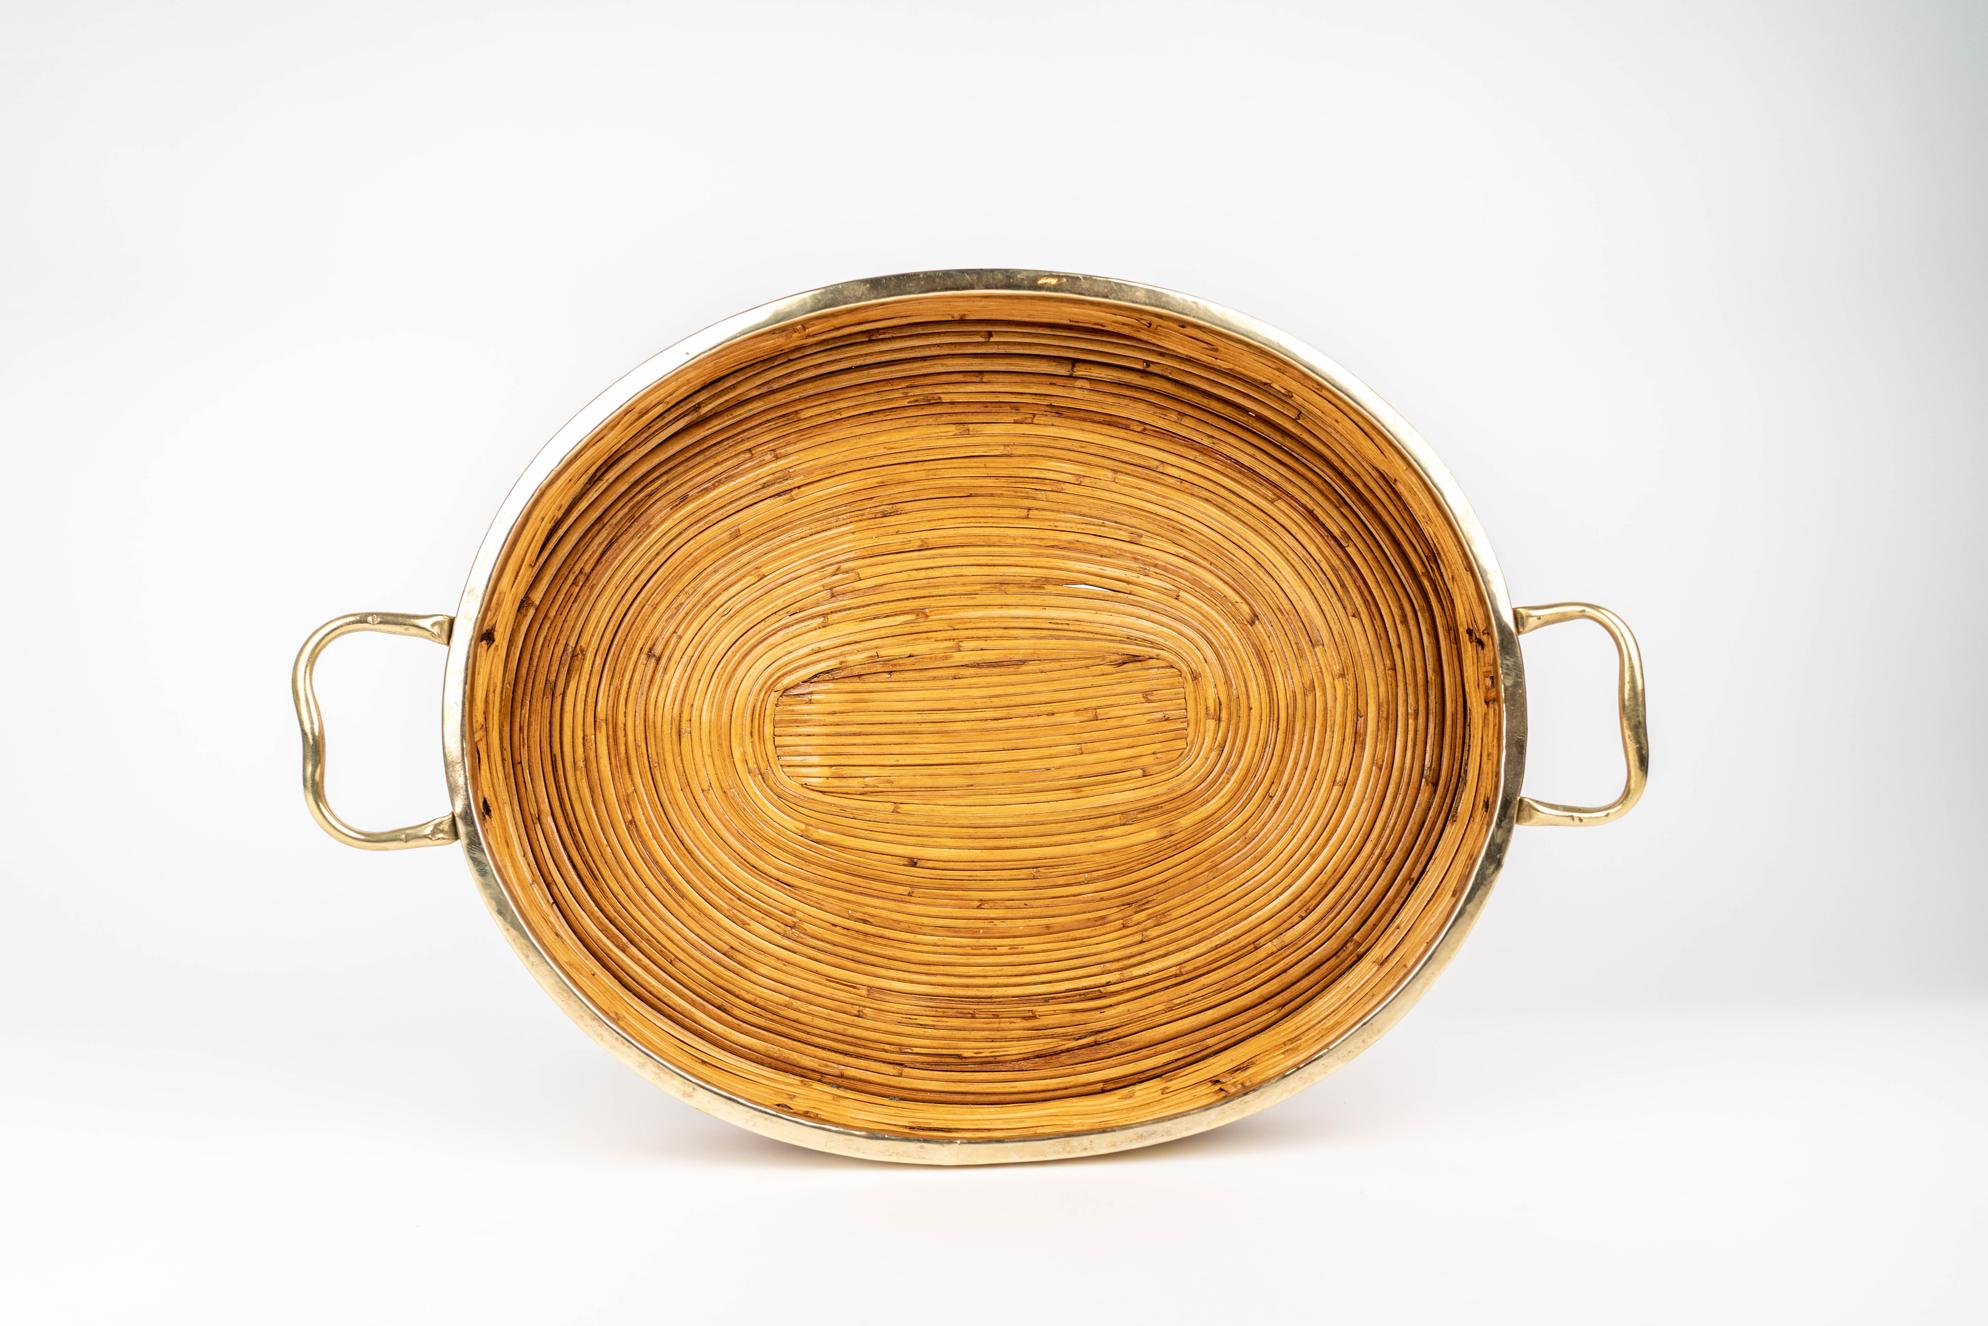 Oval Serving Tray Bamboo, Rattan & Brass, Italy 1970s For Sale 5